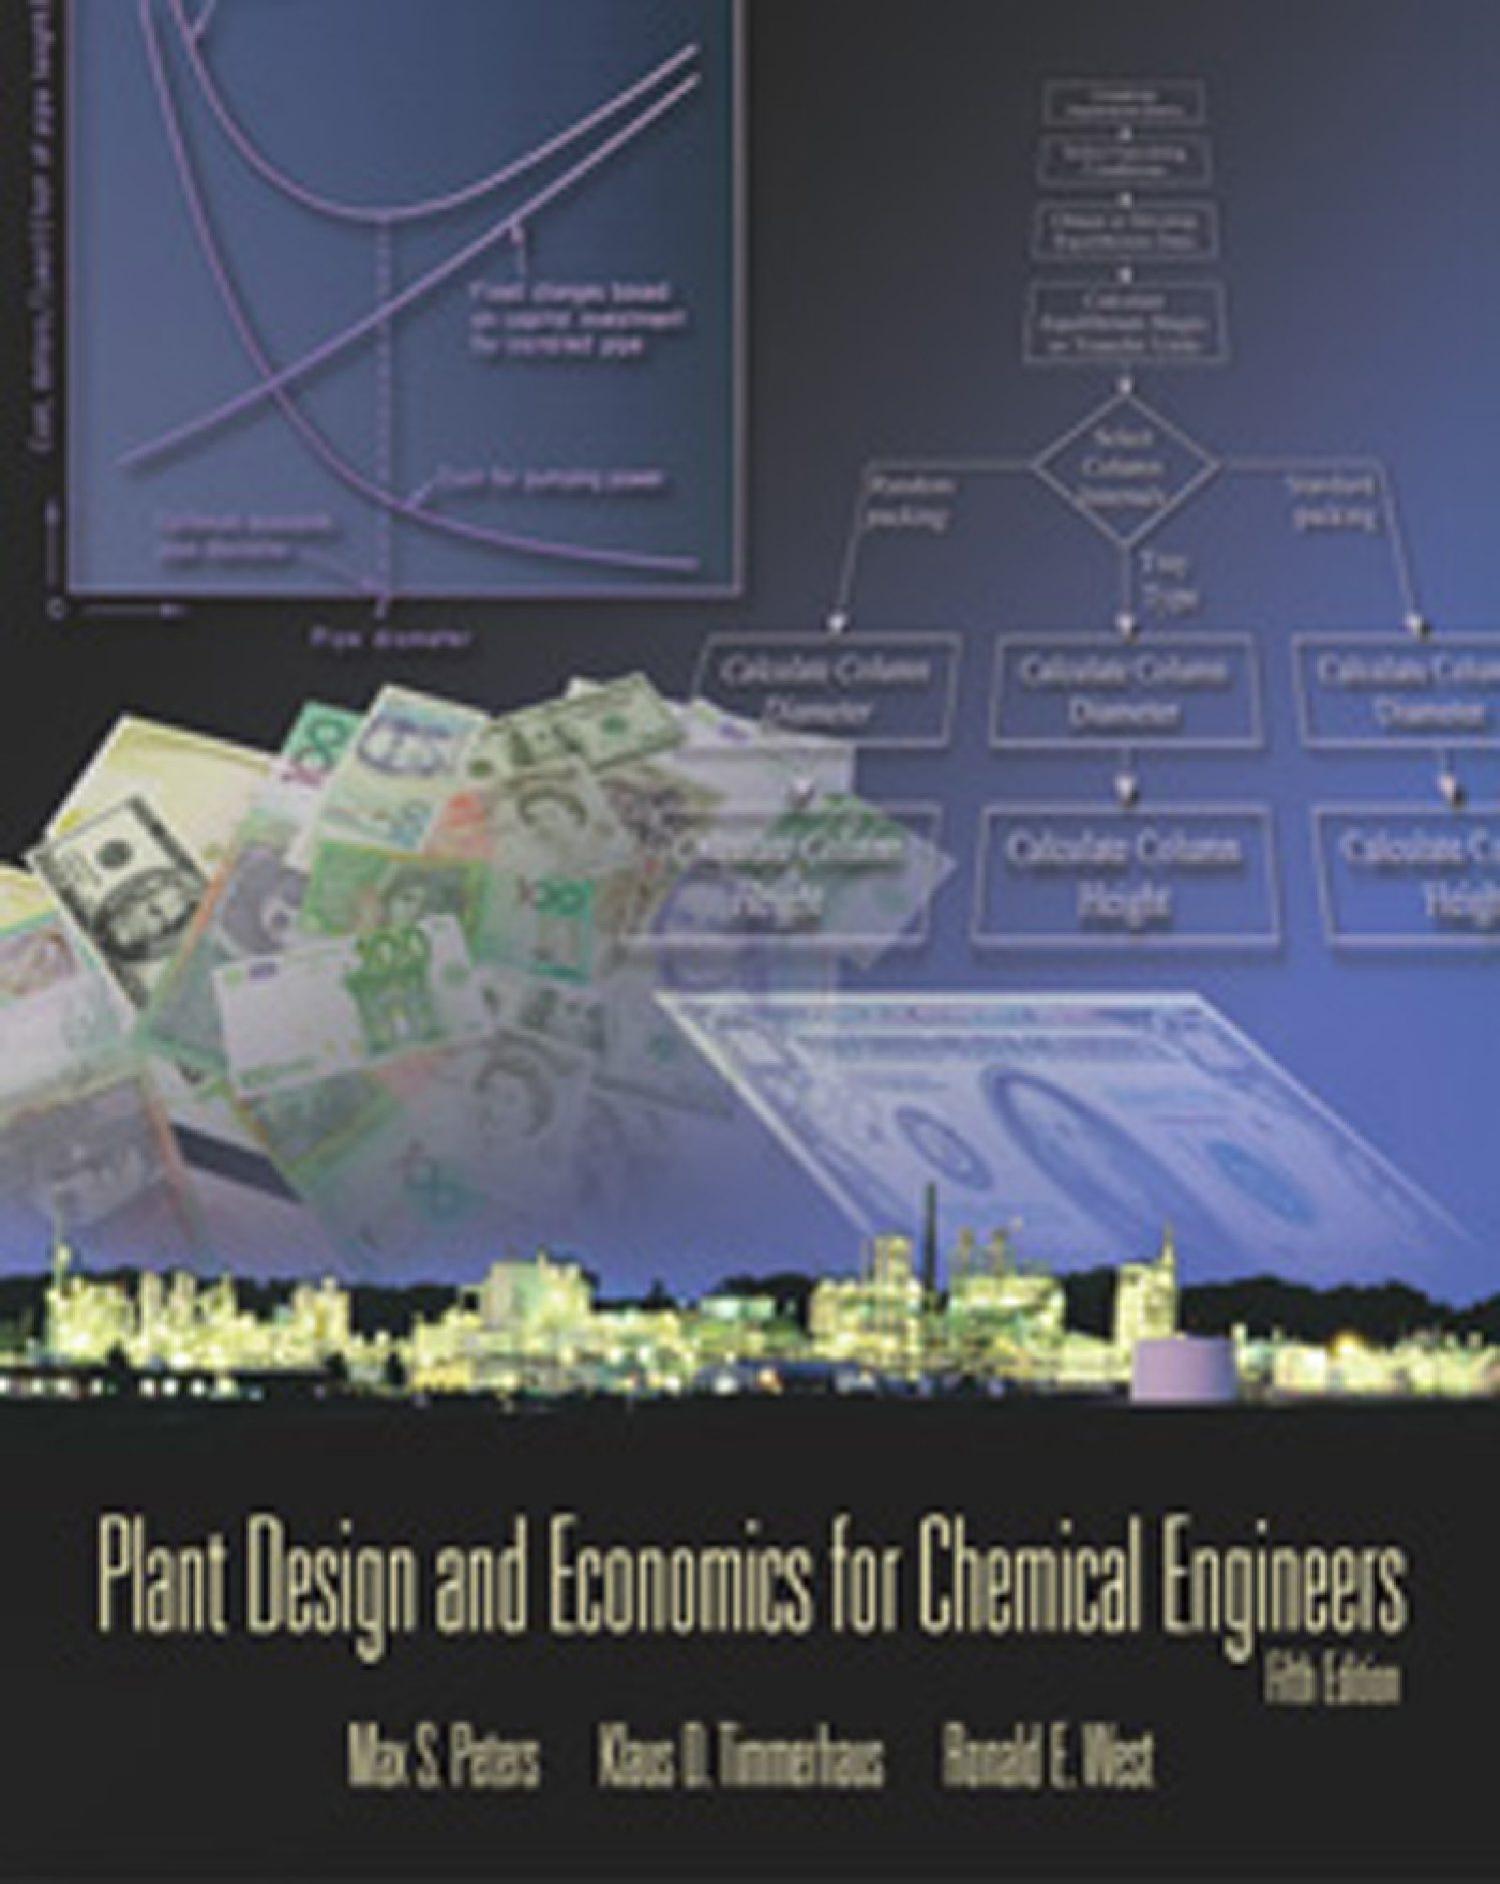 Plant Design and Economics for Chemical Engineers 5th ed. 2003.pdf